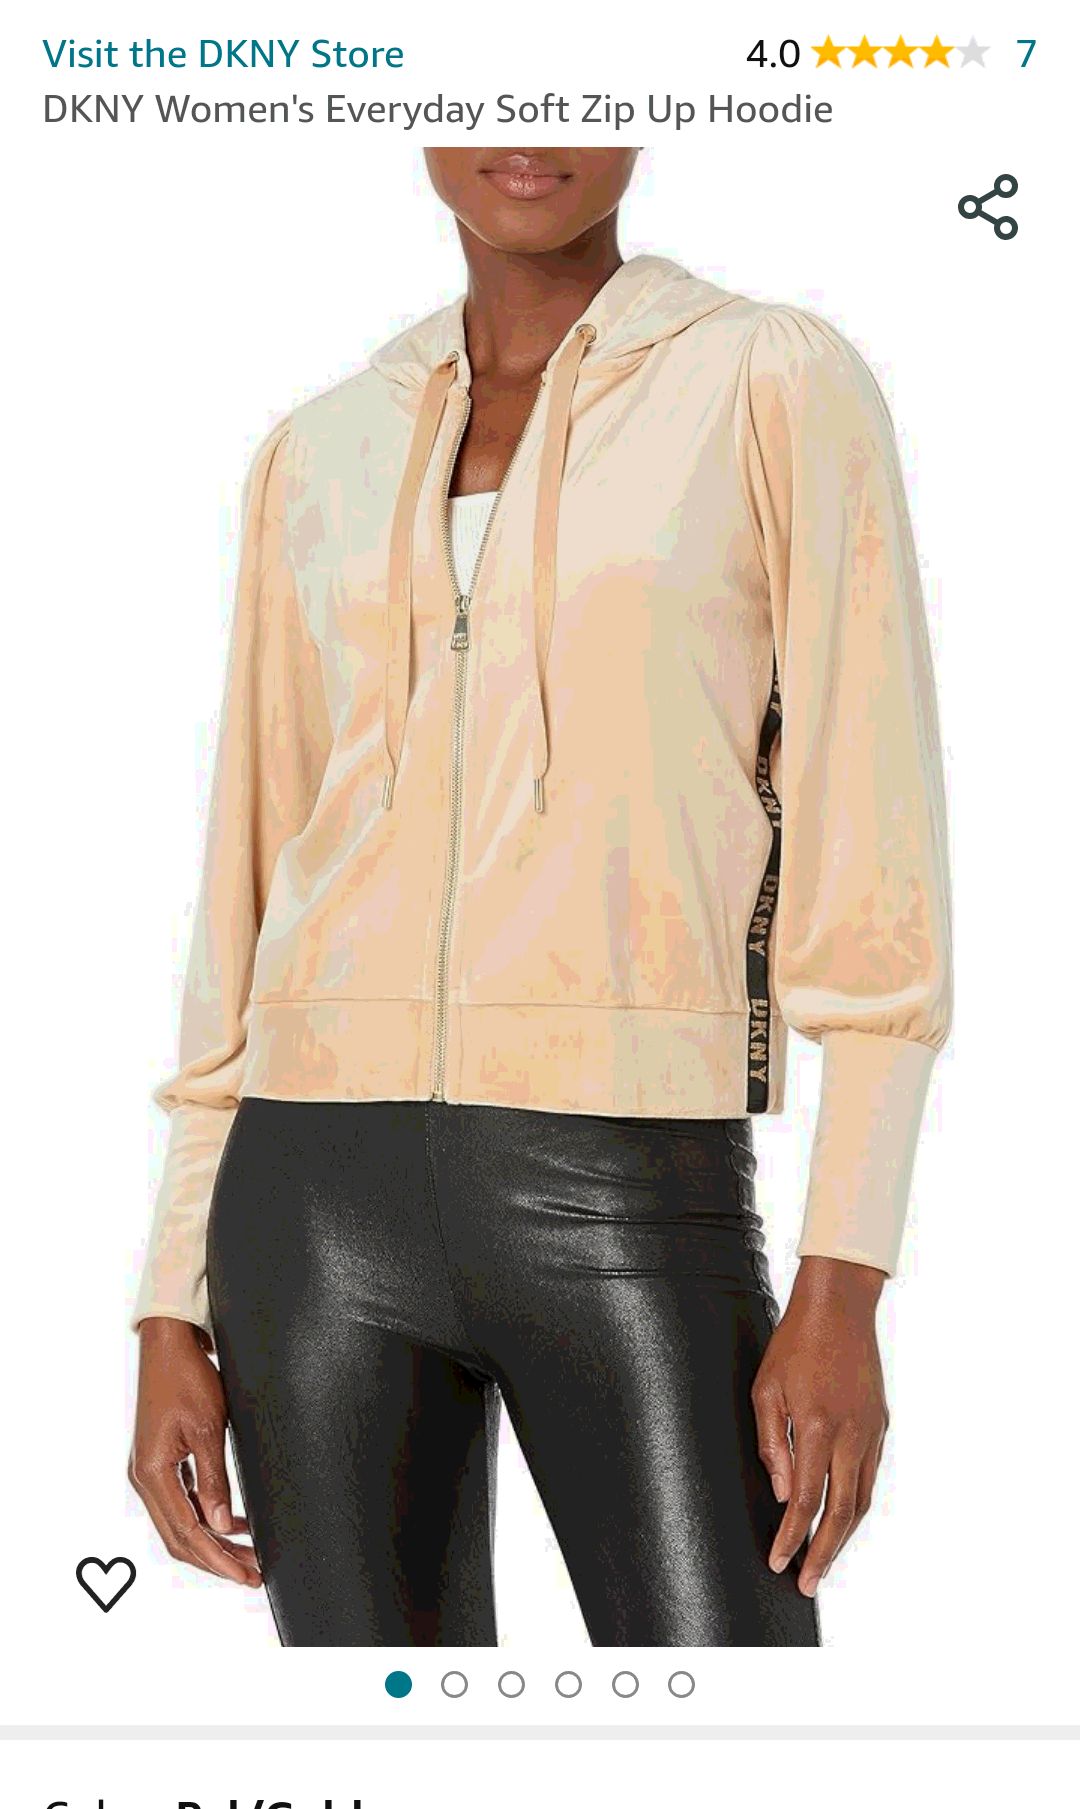 DKNY Women's Everyday Soft Zip Up Hoodie, BLK/Gold : Sports & Outdoors